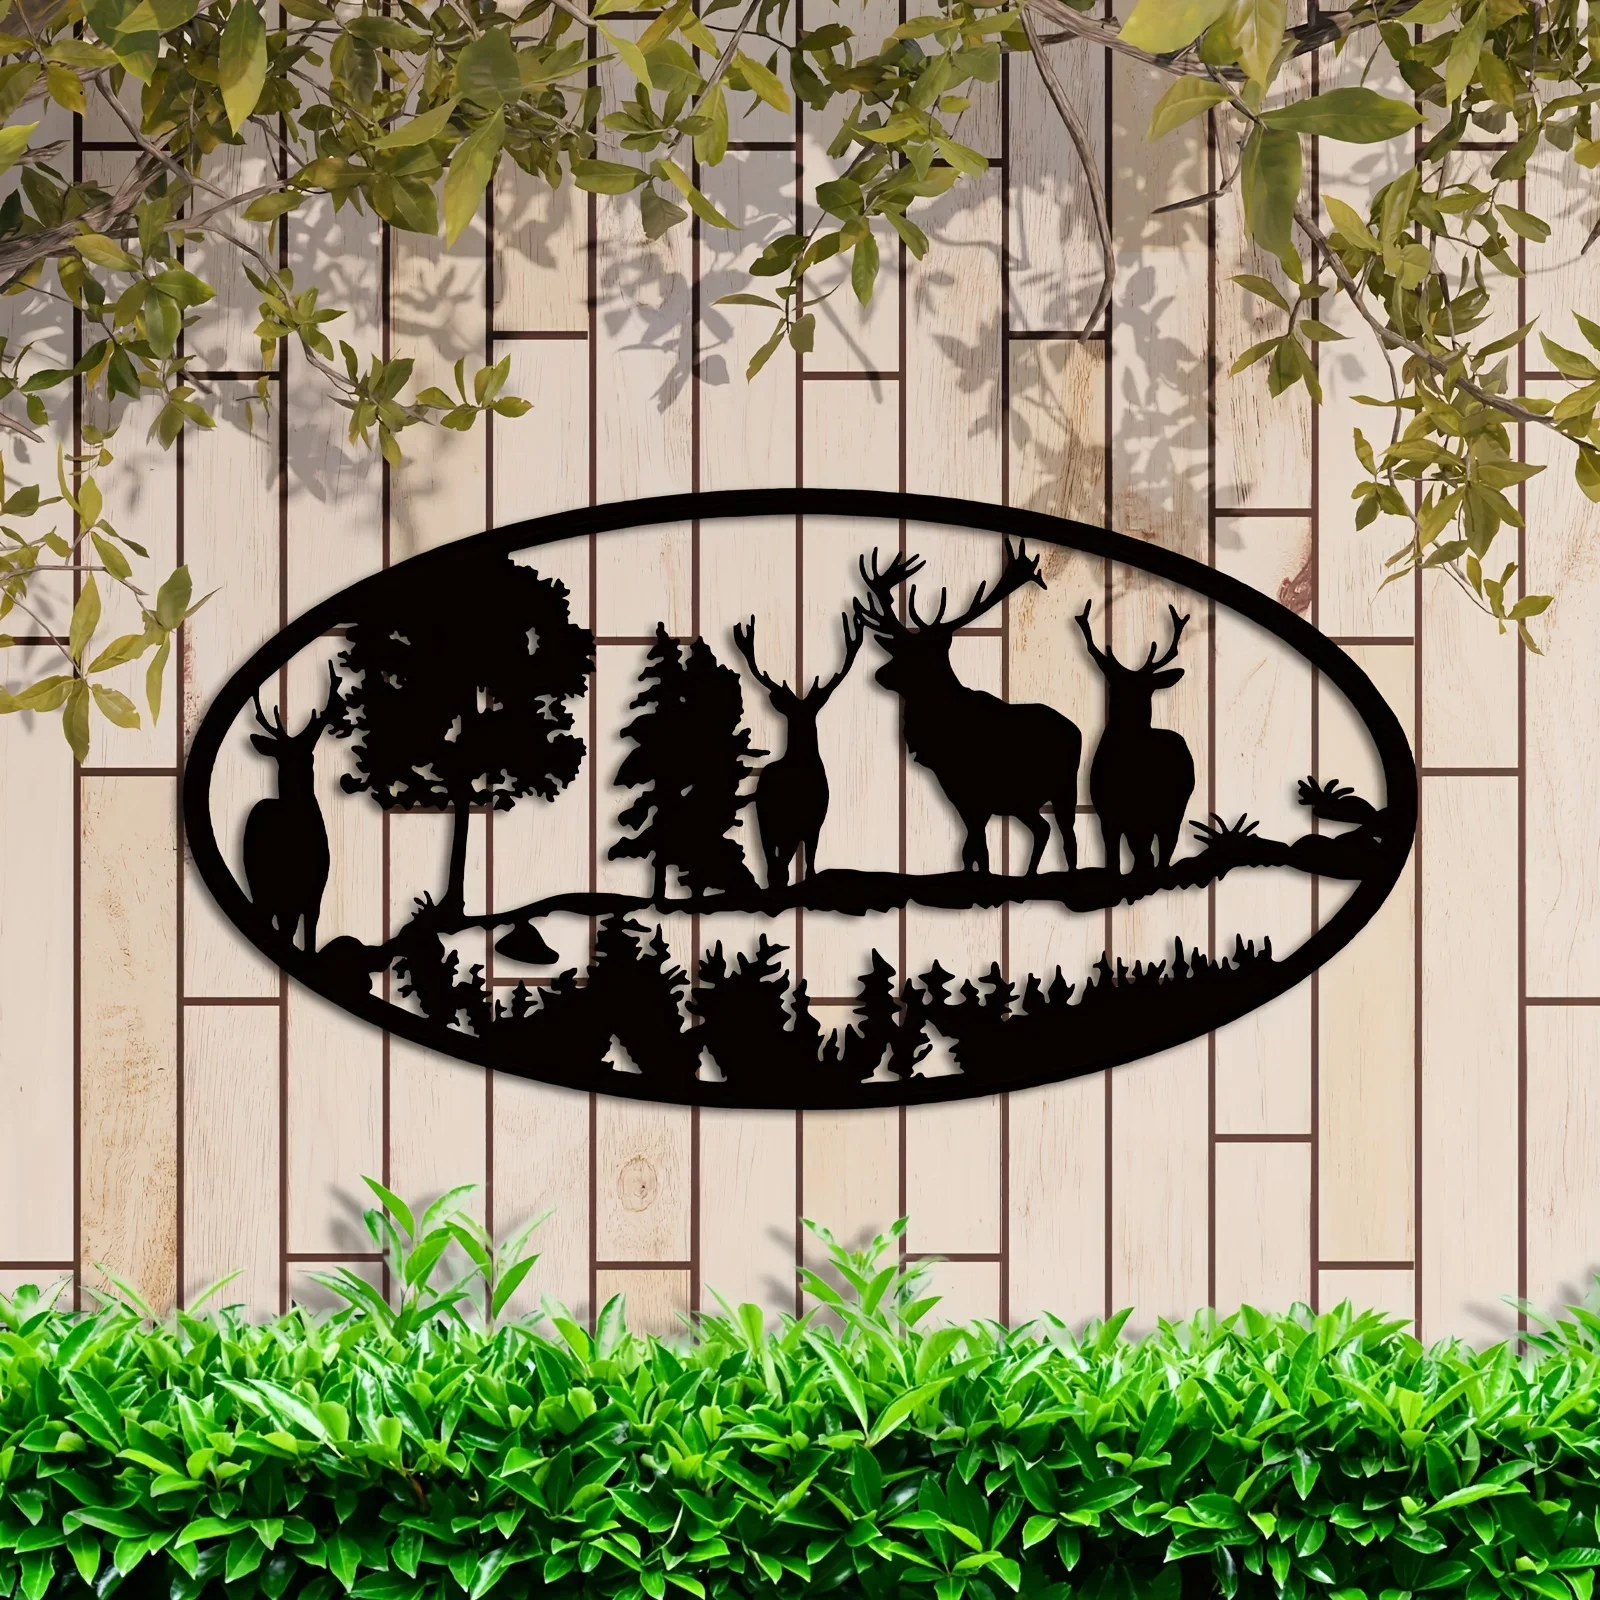 

CIFBUY Rustic Metal Deer Home Art for Bedroom Home and Cabin Wall Decor Mountain Landscape Sculpture with Woodland Theme wall d